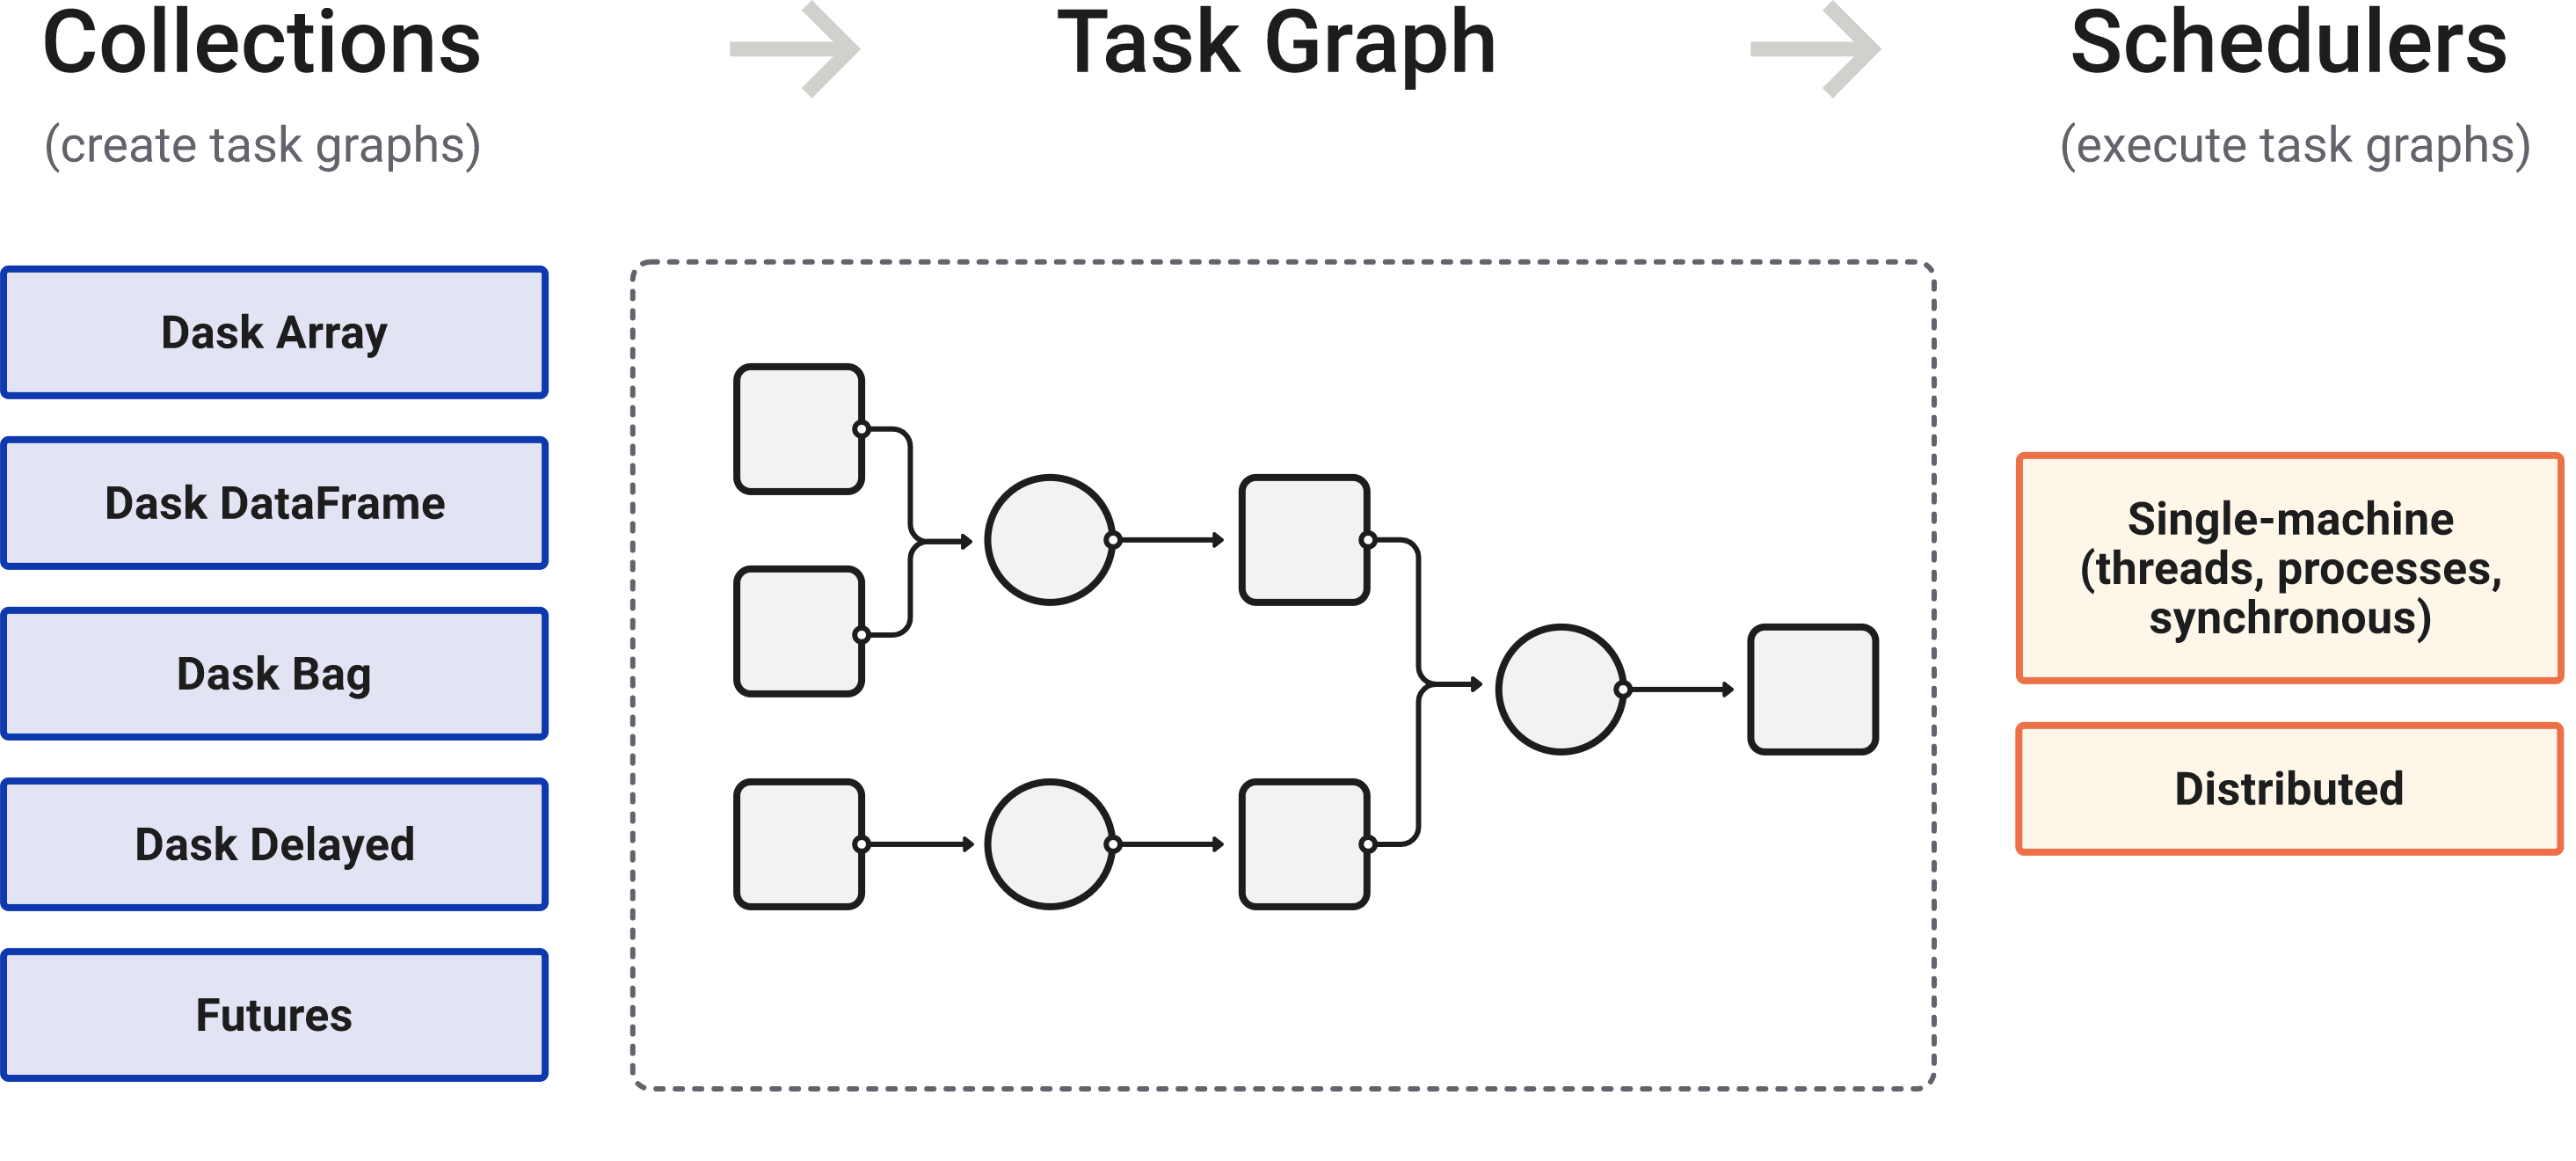 Dask is composed of three parts. "Collections" create "Task Graphs" which are then sent to the "Scheduler" for execution. There are two types of schedulers that are described in more detail below.